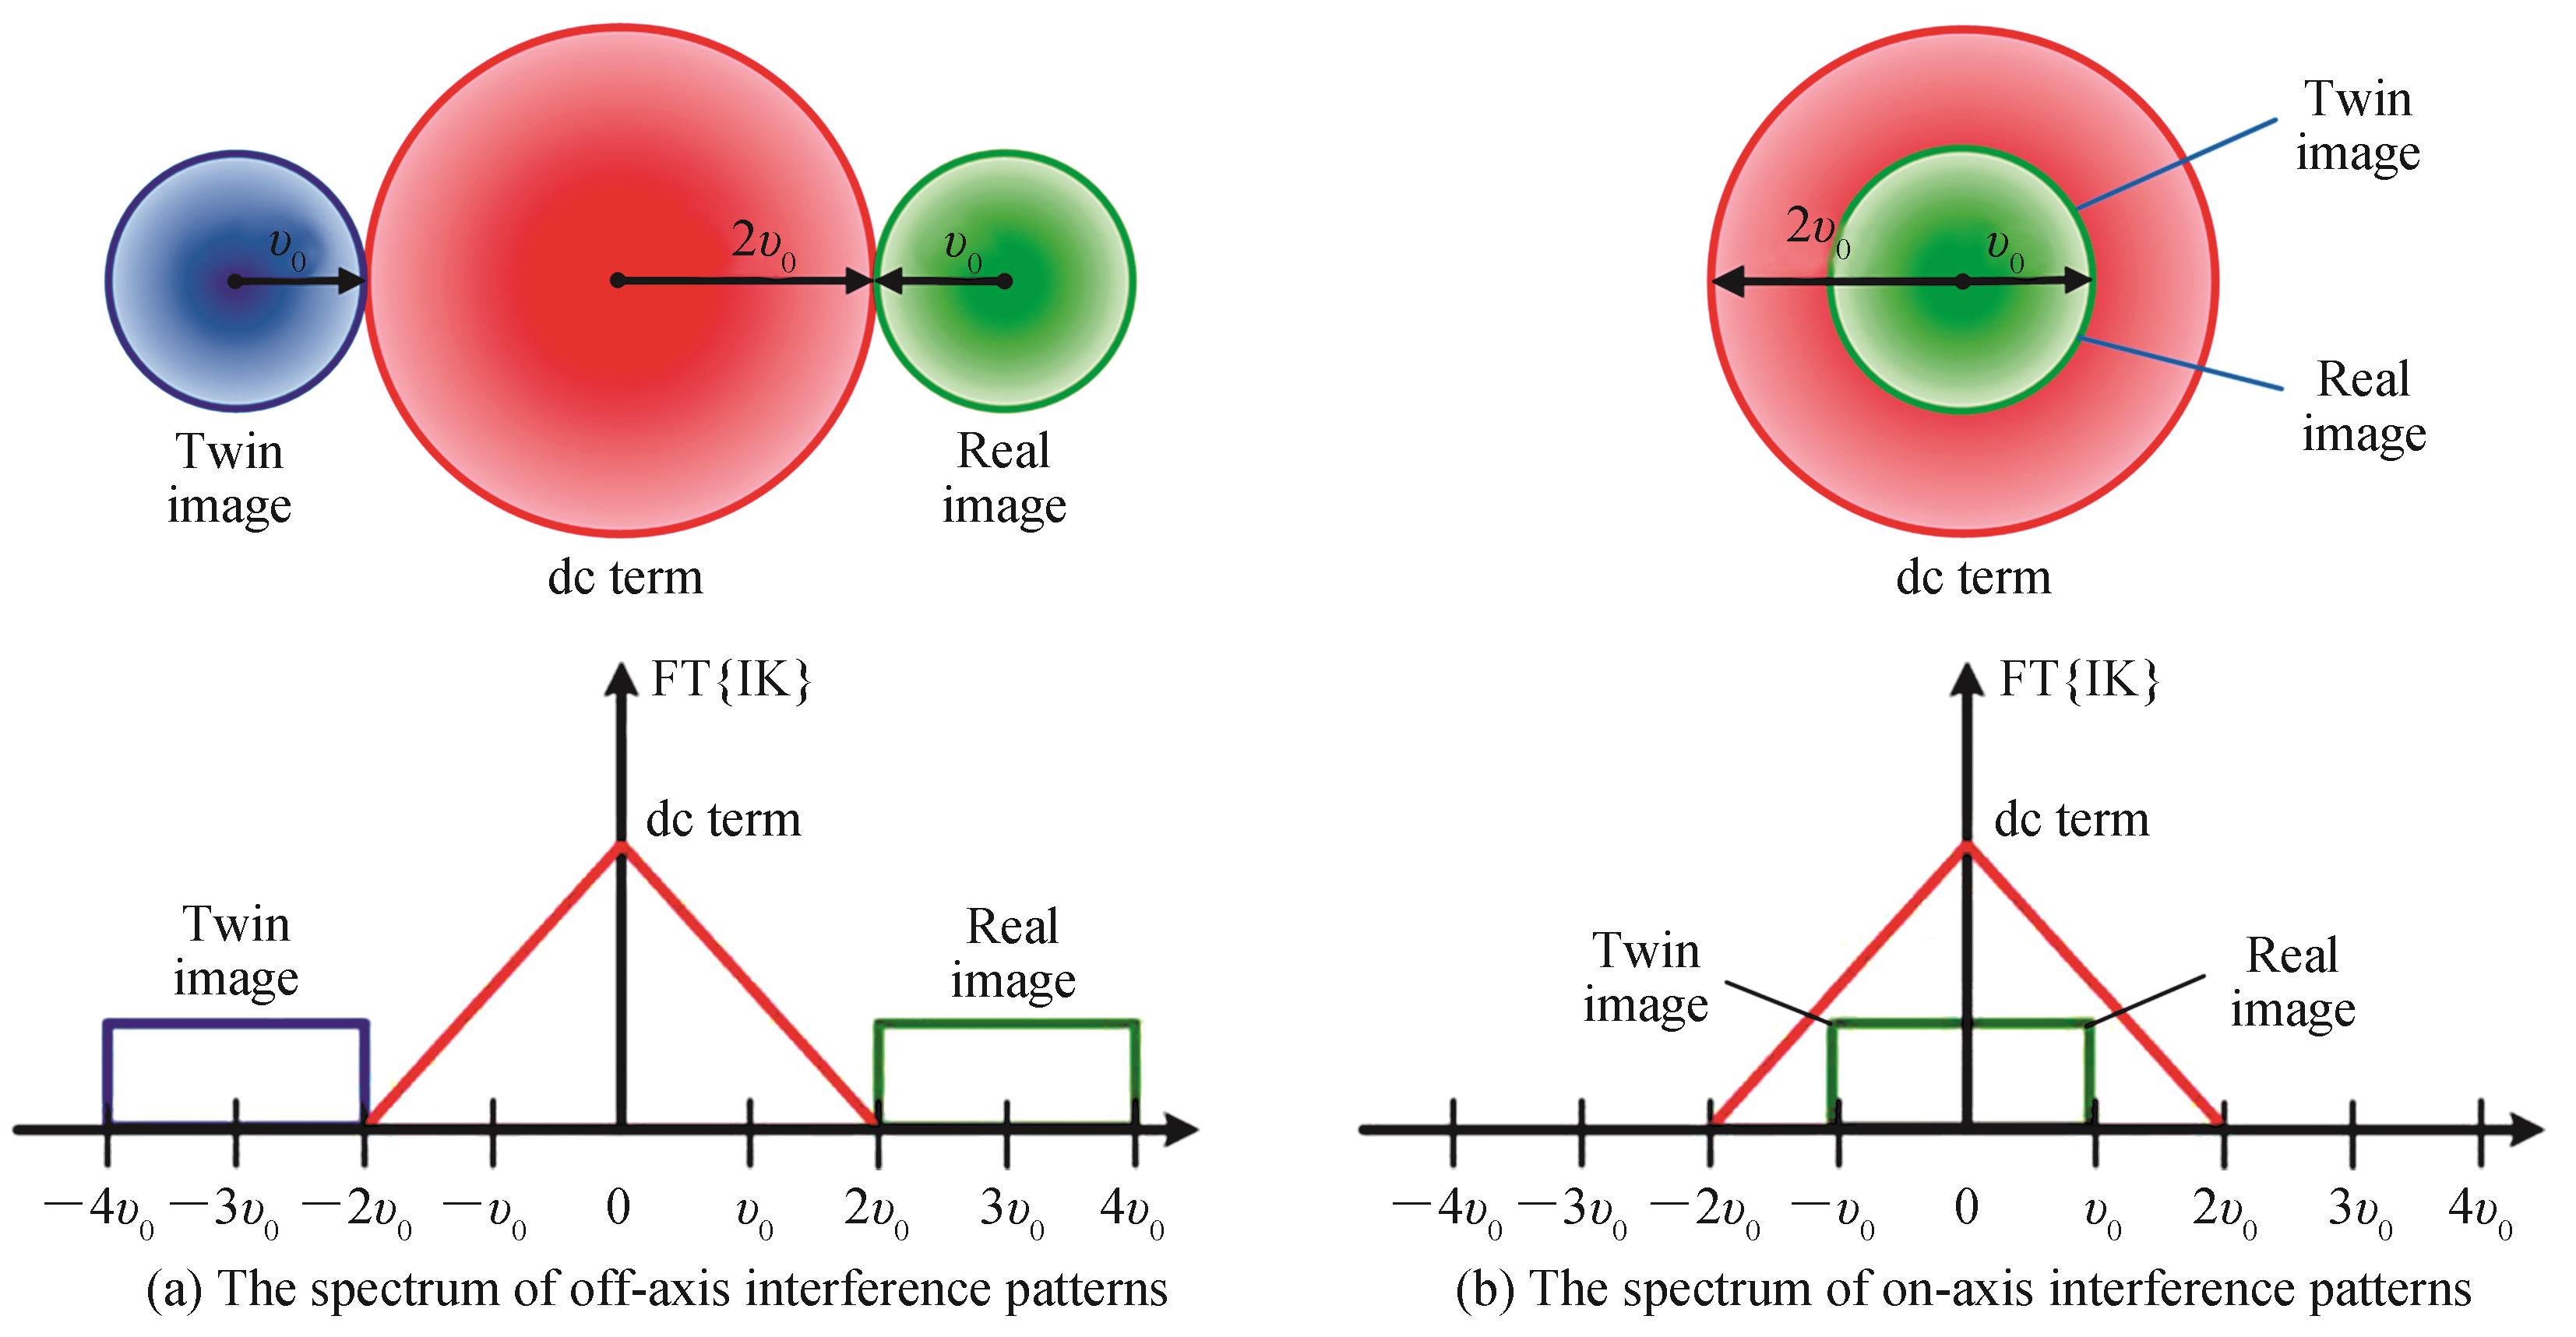 The spectrum diagram of off-axis and on-axis interference patterns